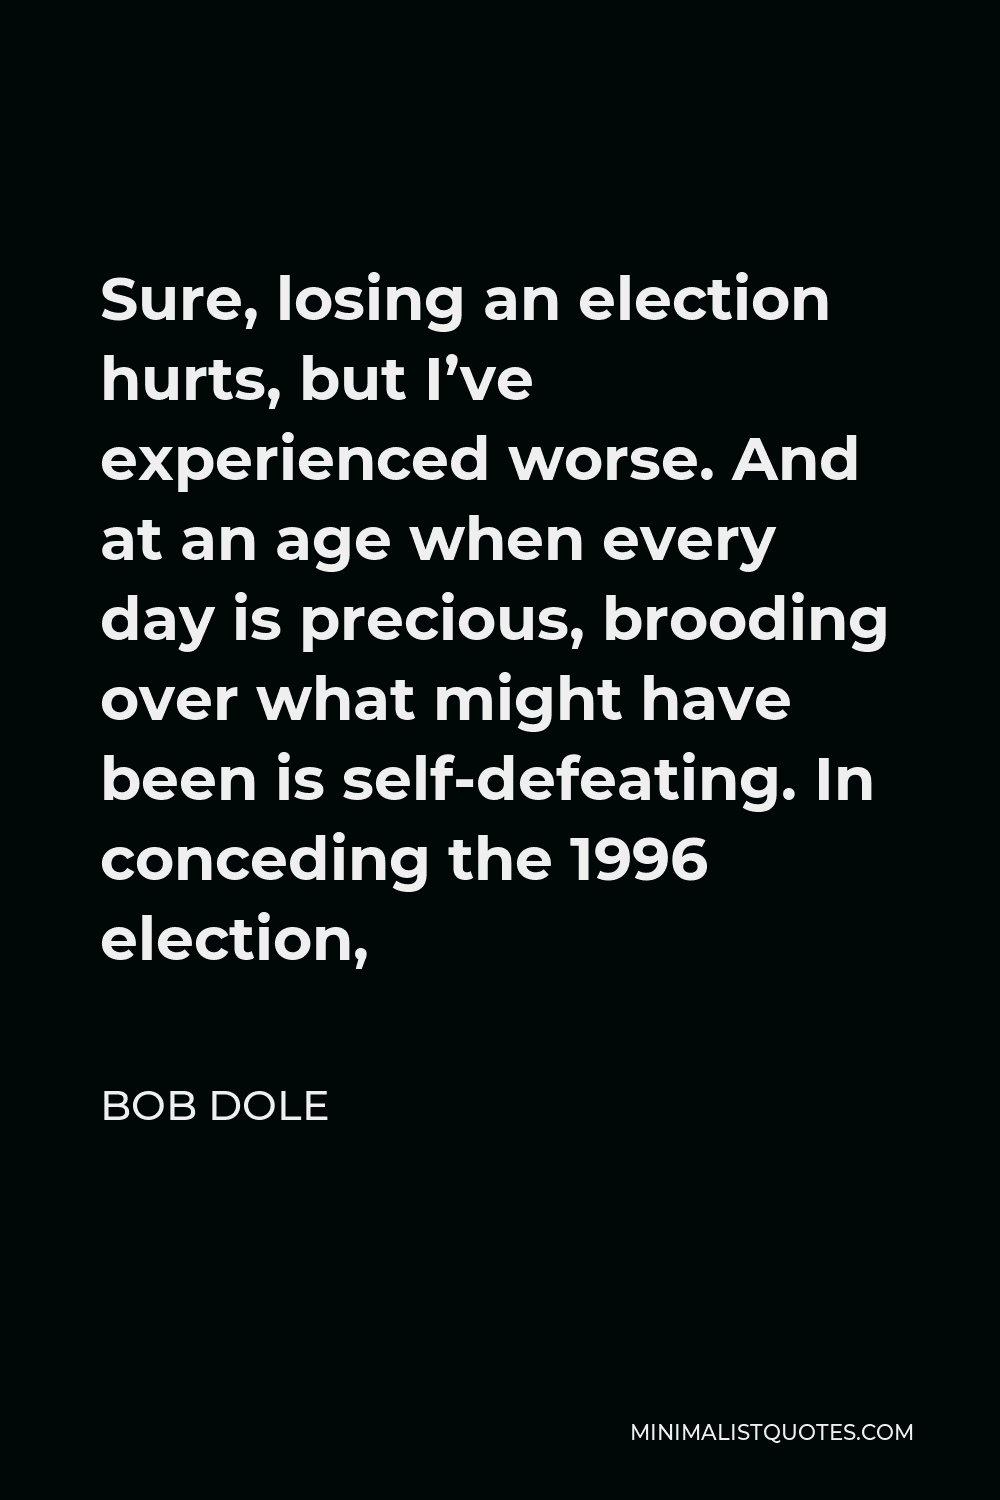 Bob Dole Quote - Sure, losing an election hurts, but I’ve experienced worse. And at an age when every day is precious, brooding over what might have been is self-defeating. In conceding the 1996 election,